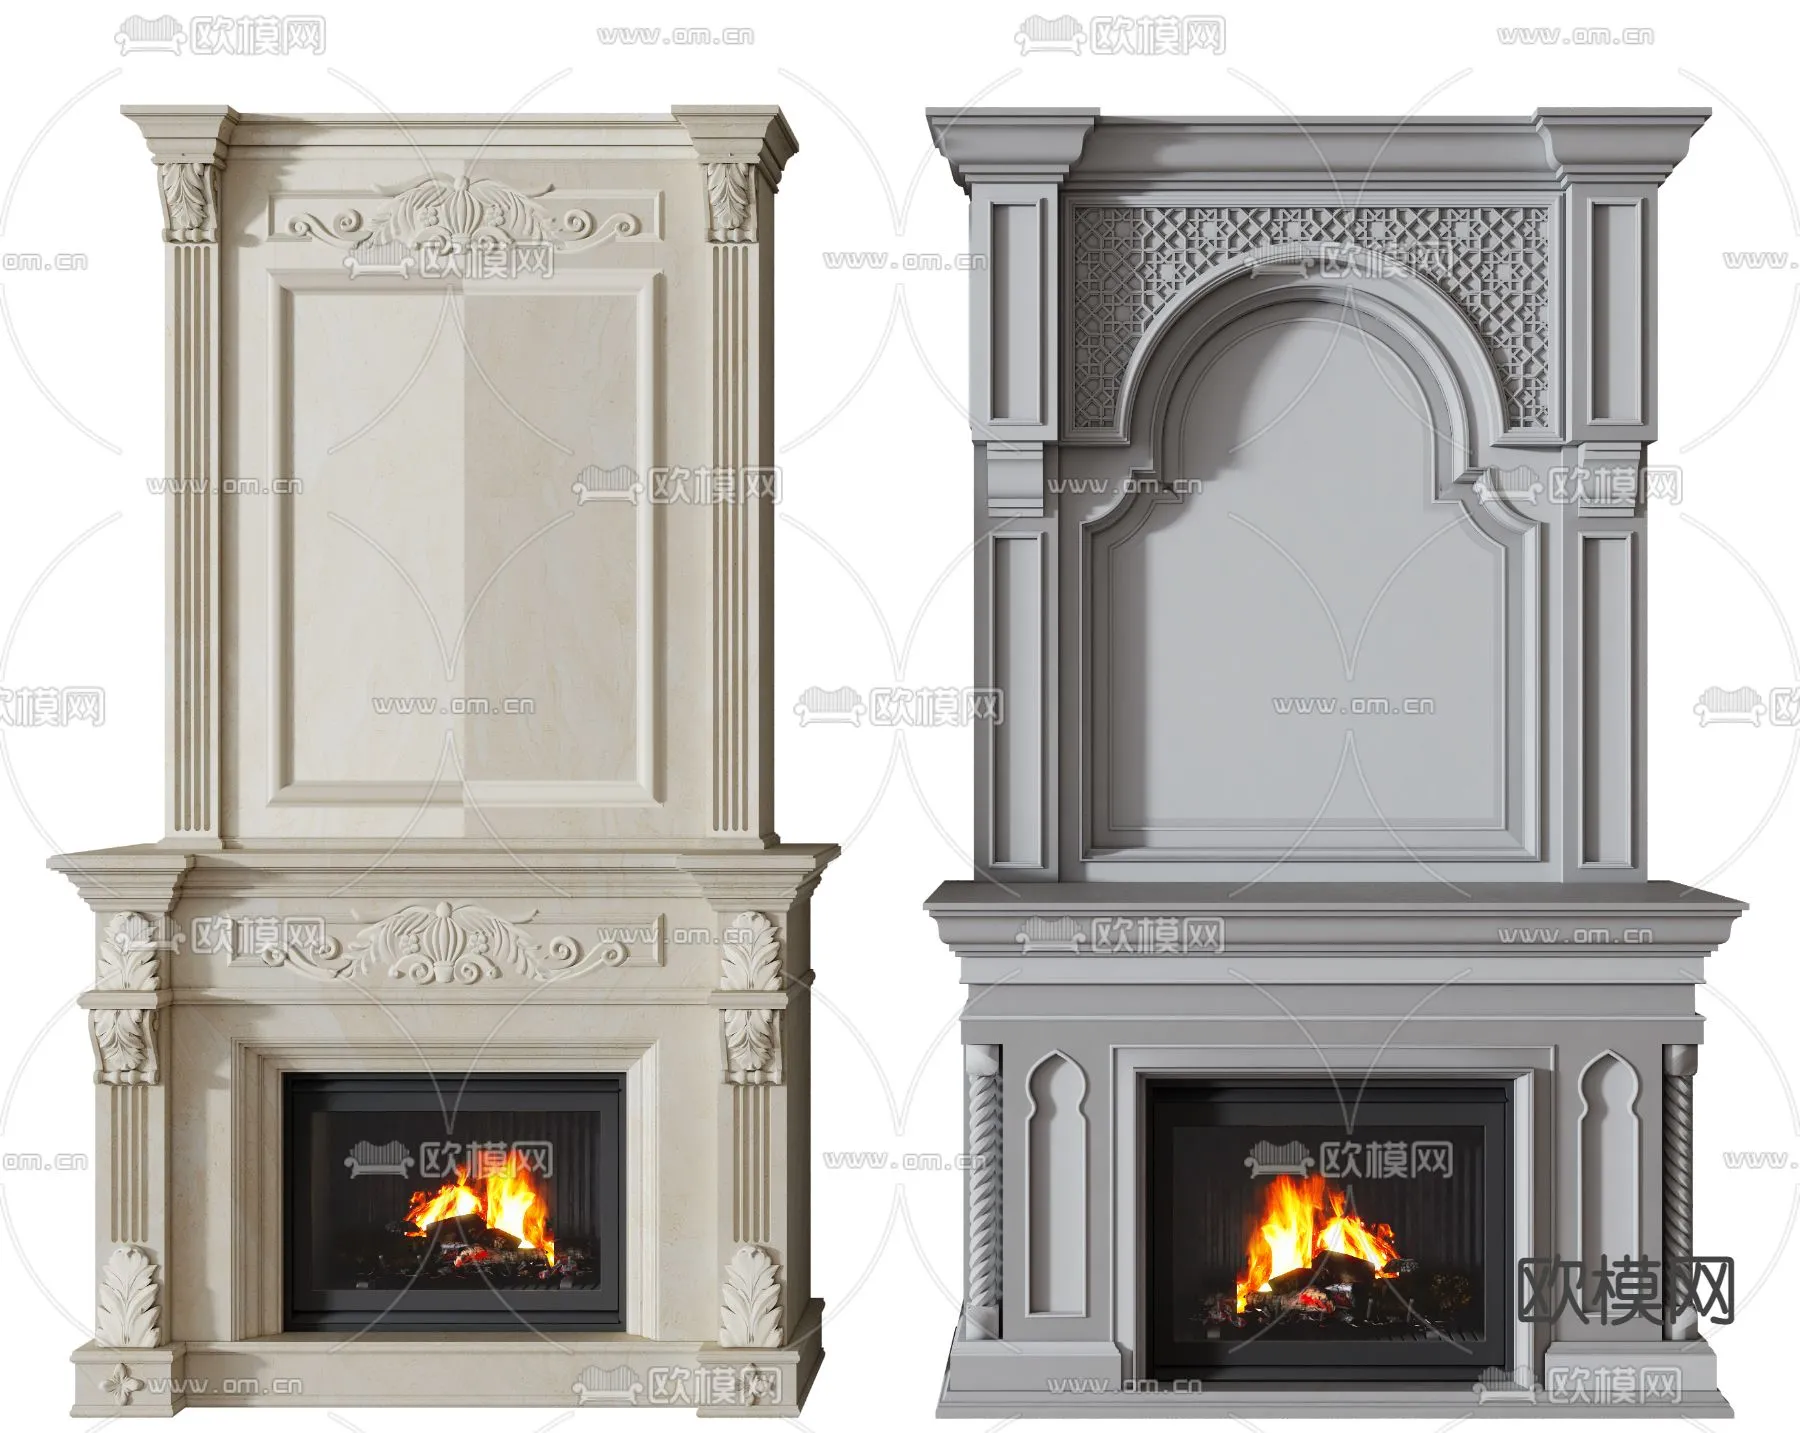 CLASSIC – FIREPLACE 3DMODELS – 071